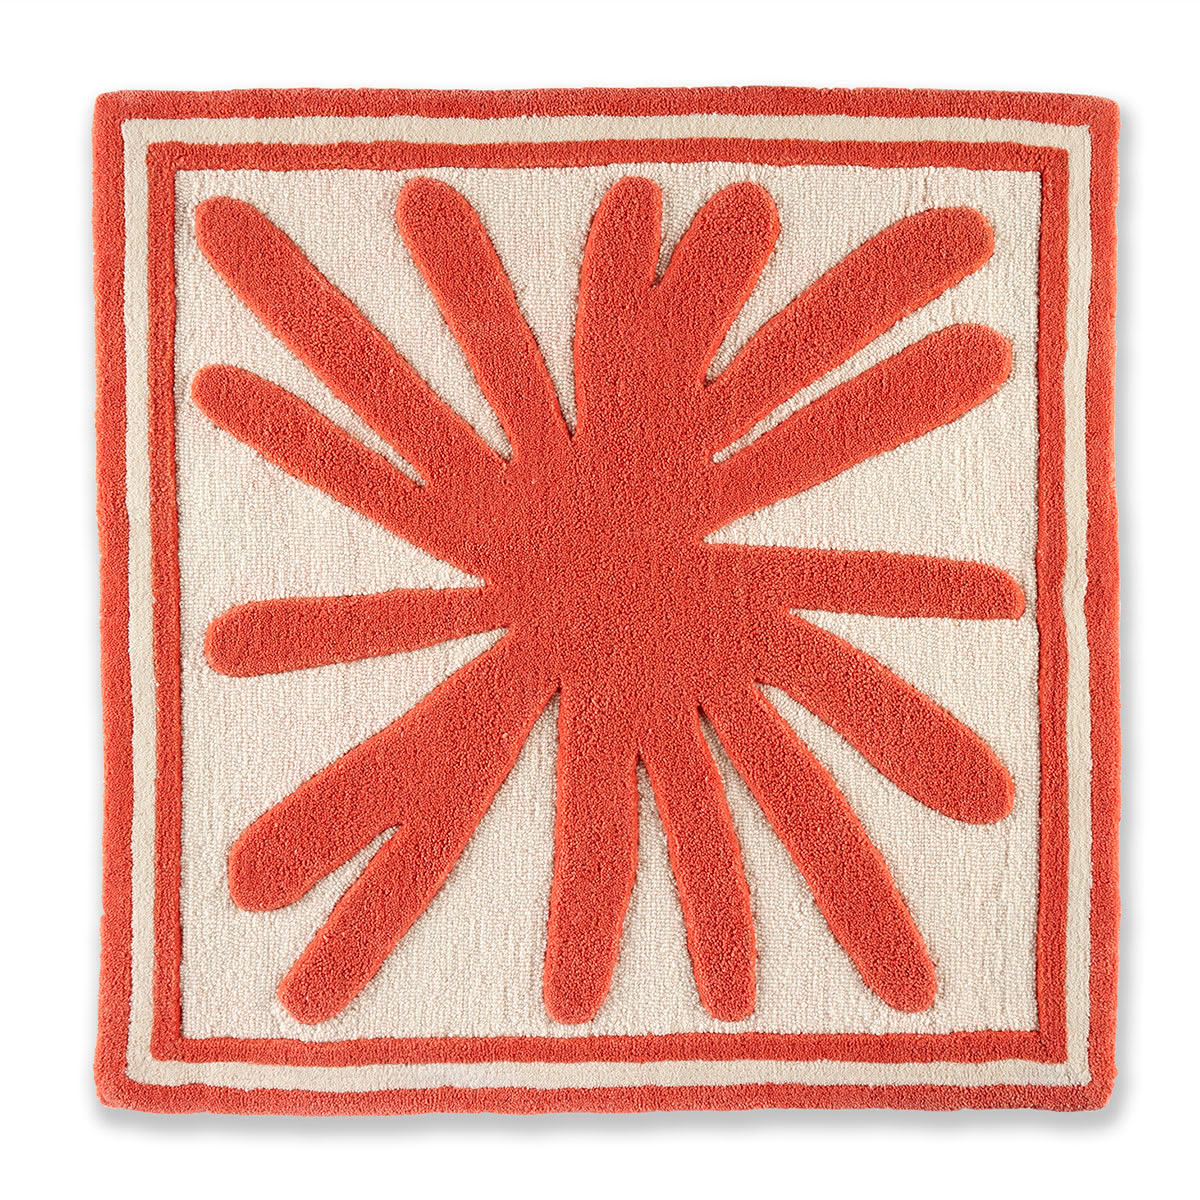 An abstract coral colored rug.